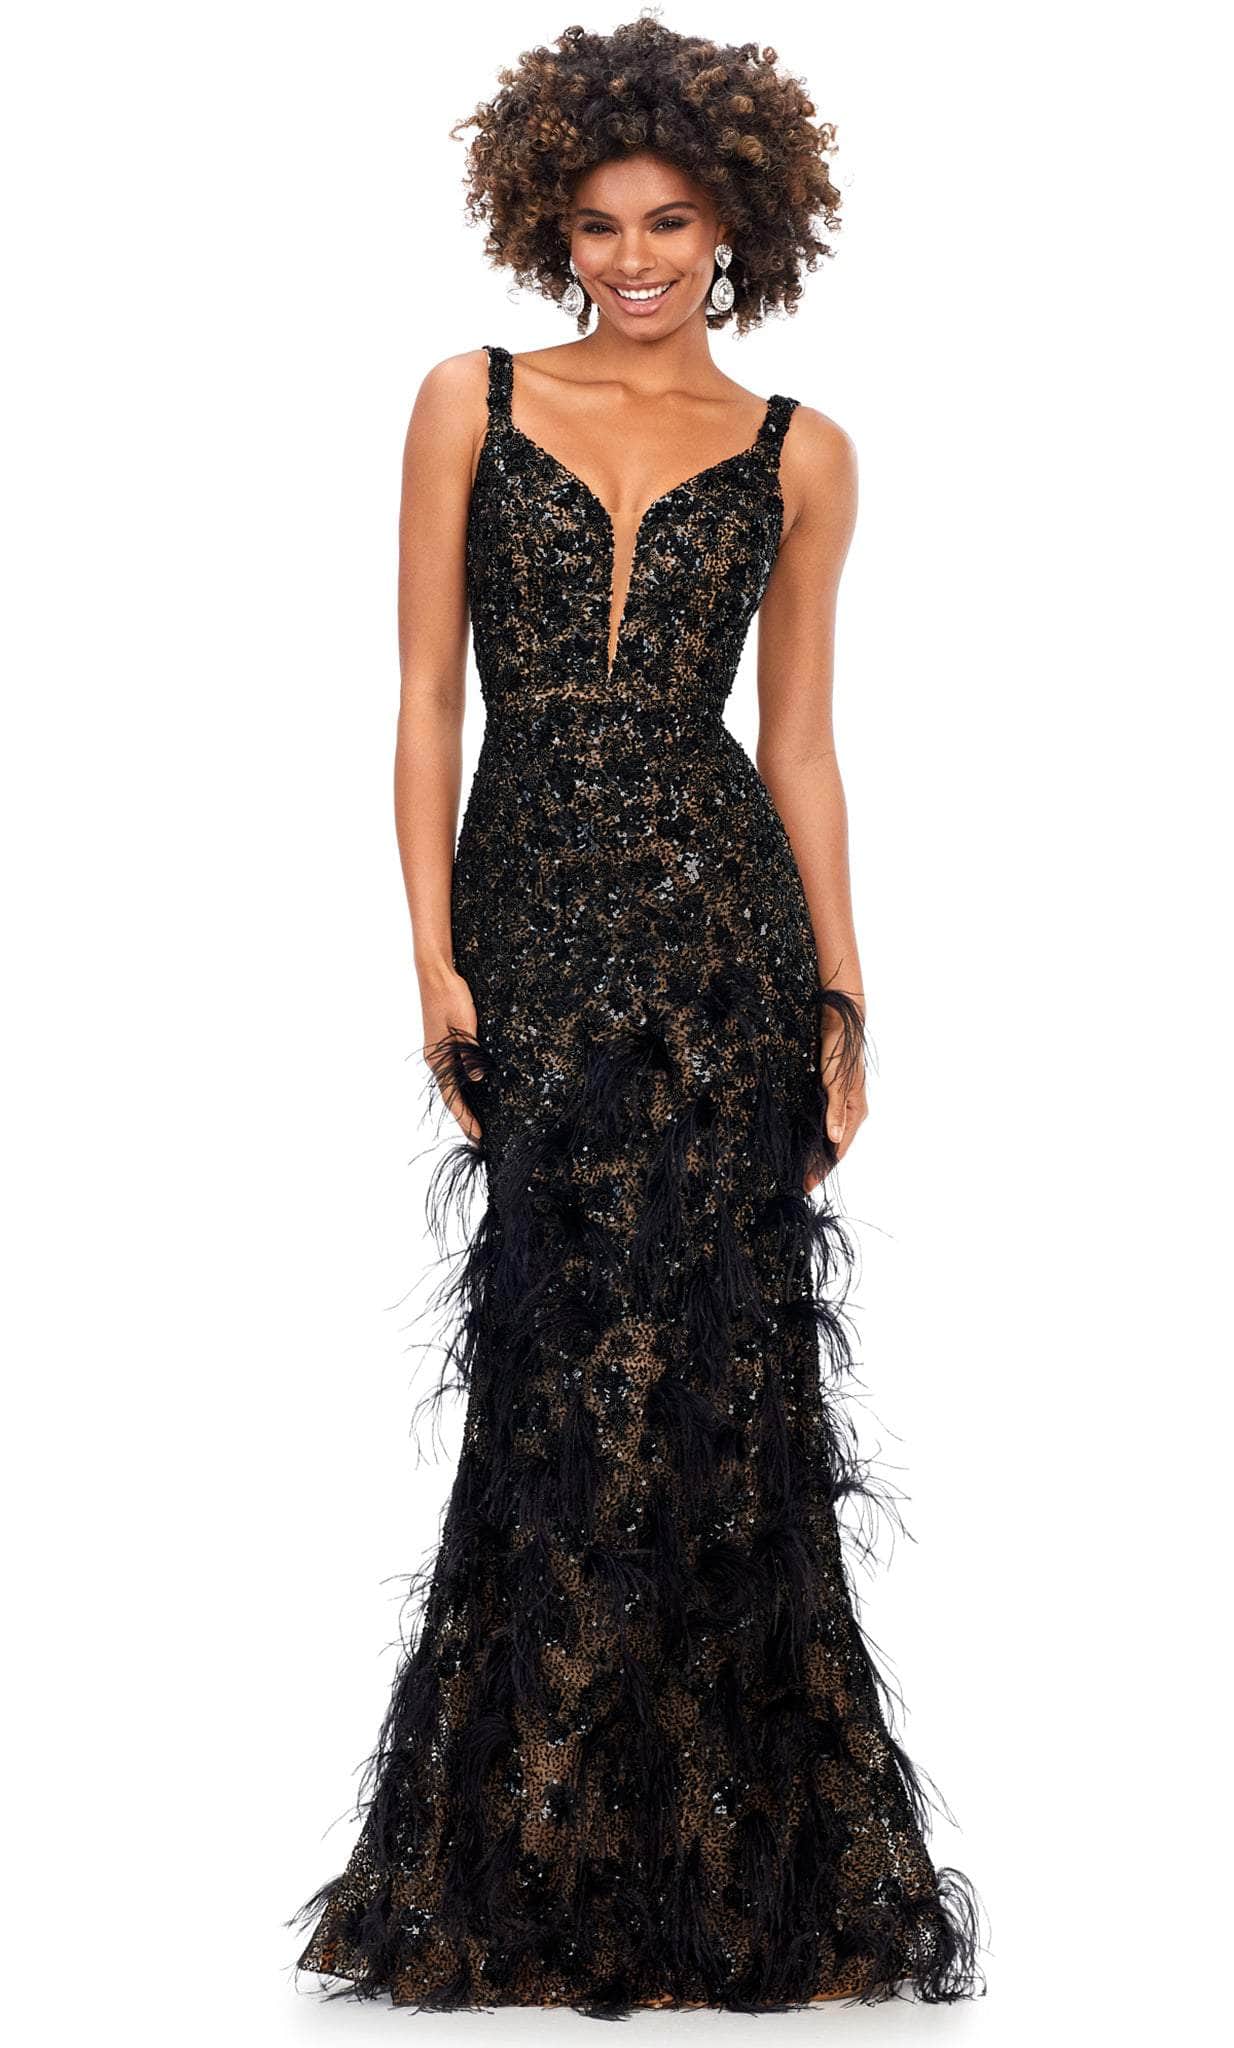 Image of Ashley Lauren 11279 - Sleeveless Sequin Prom Gown